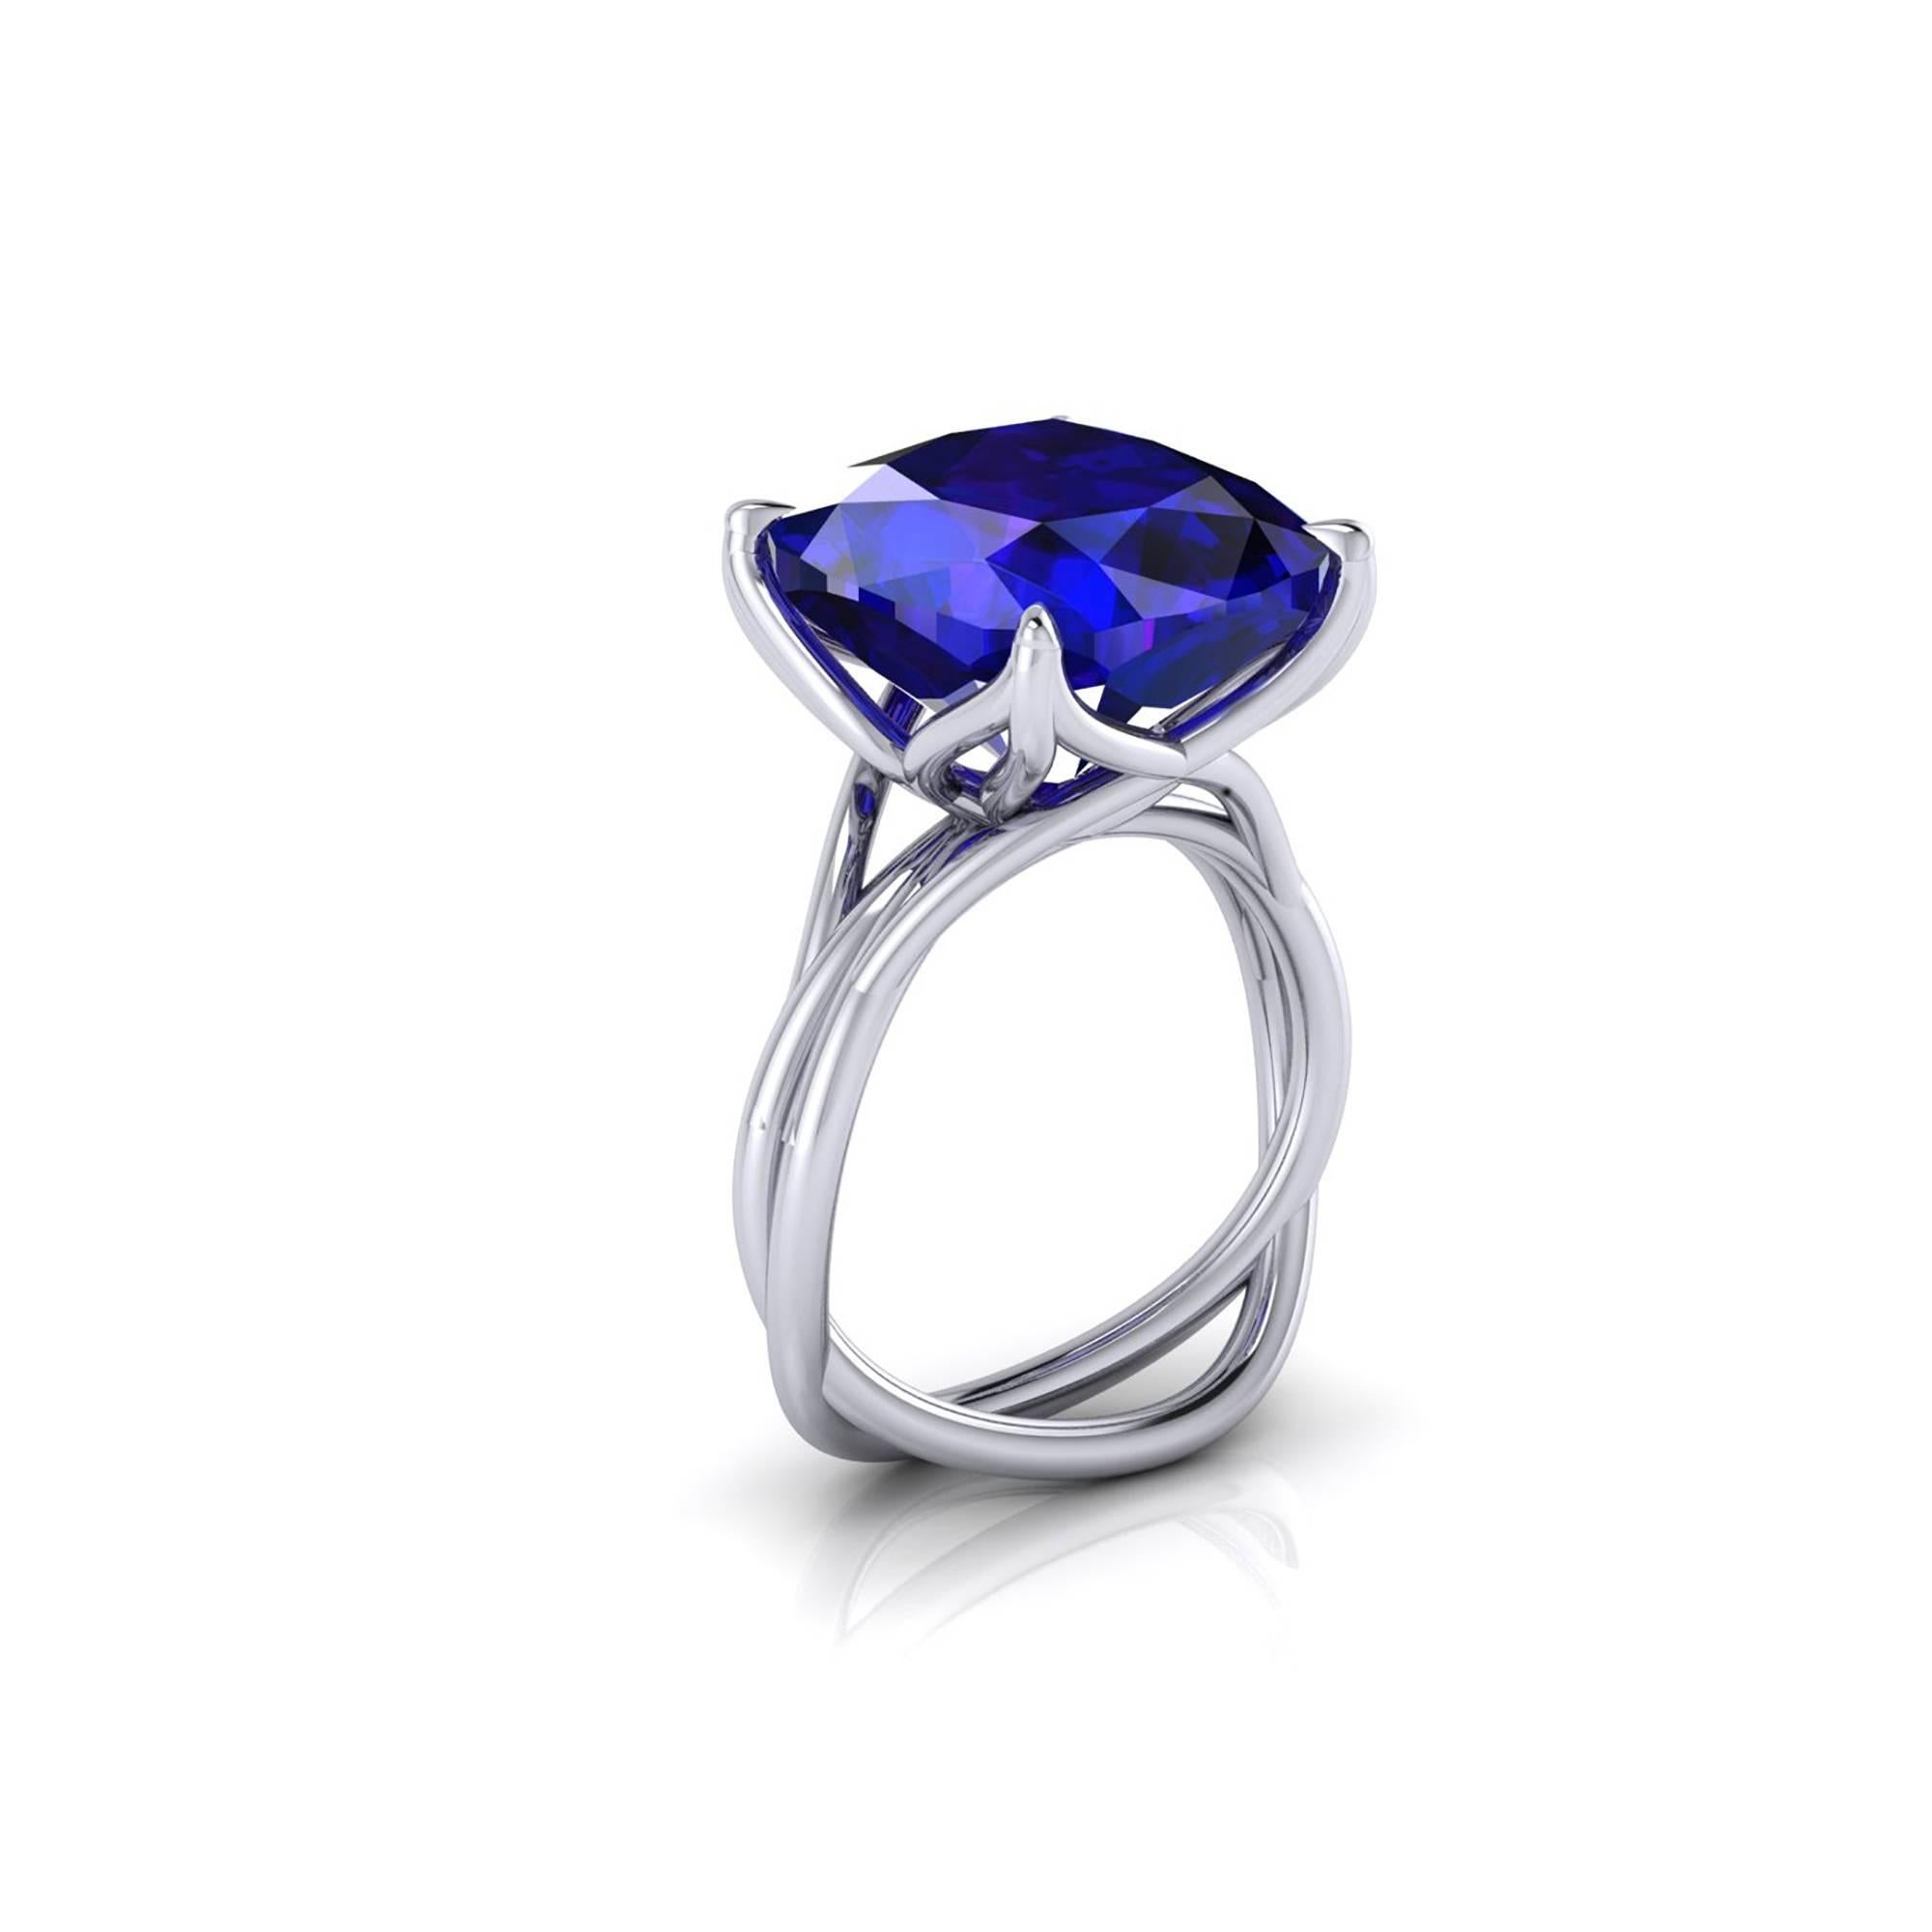 A Spectacular 9.23 carat natural Tanzanite of a deep blue and purple refractions, unique in its splendor, GIA Certified, in a one of a kind, hand made 18k white gold ring, designed and conceived in New York City. A design that recall nature's vines